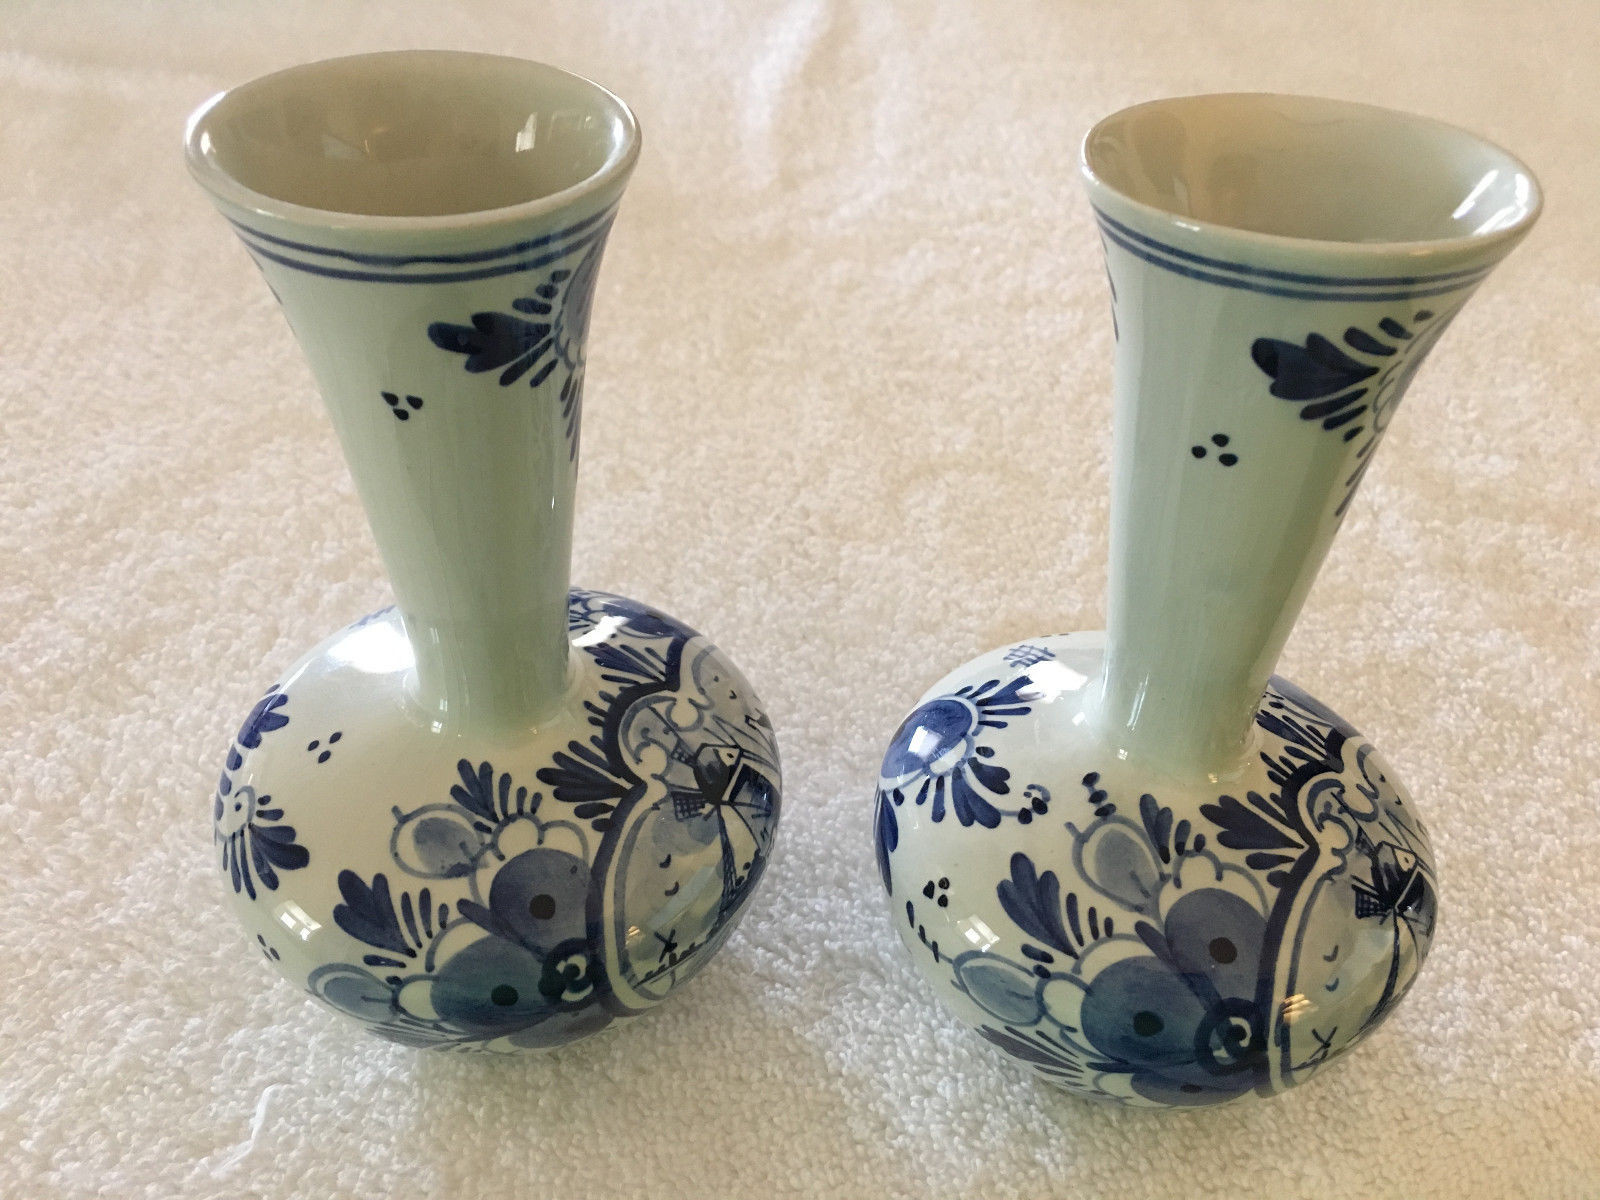 21 Unique Hand Painted Delft Holland Bud Vase 2022 free download hand painted delft holland bud vase of vintage pair of delft blue hand painted 6 bud vase made in holland throughout vintage pair of delft blue hand painted 6 bud vase made in holland